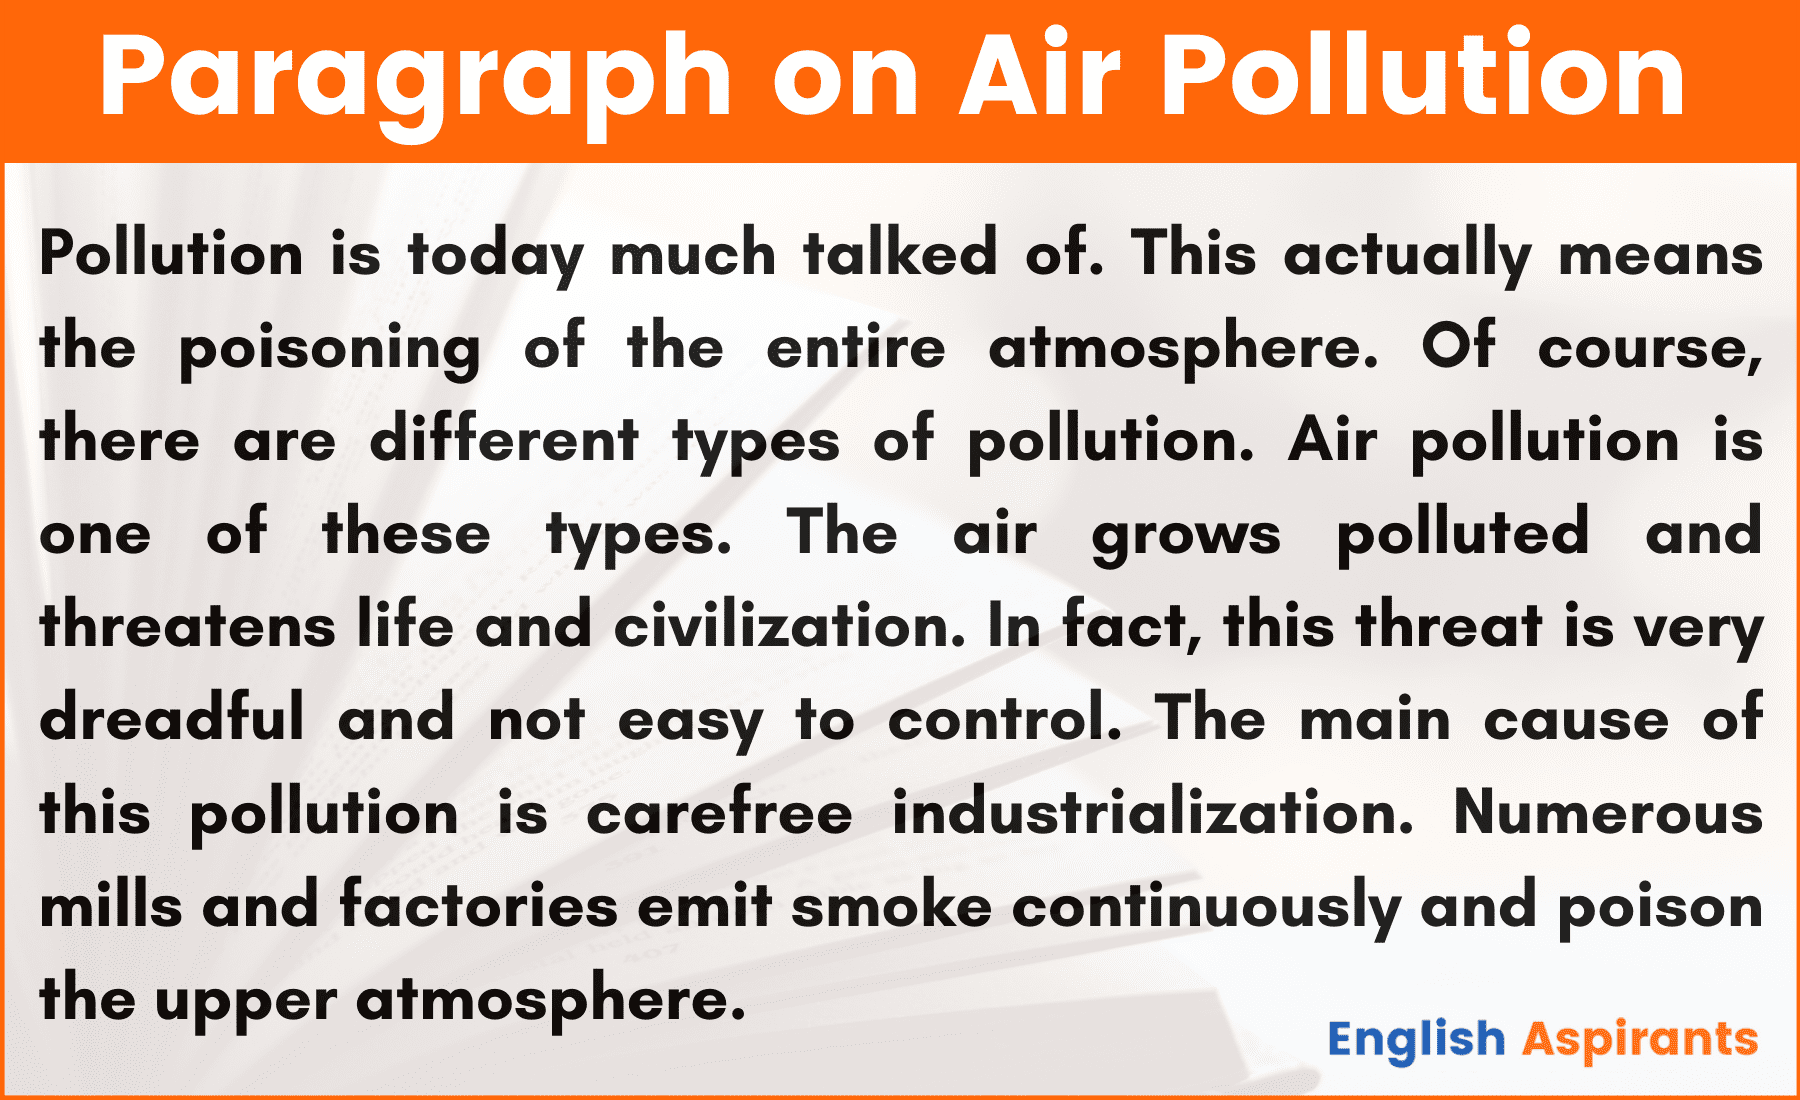 Paragraph on Air Pollution in English